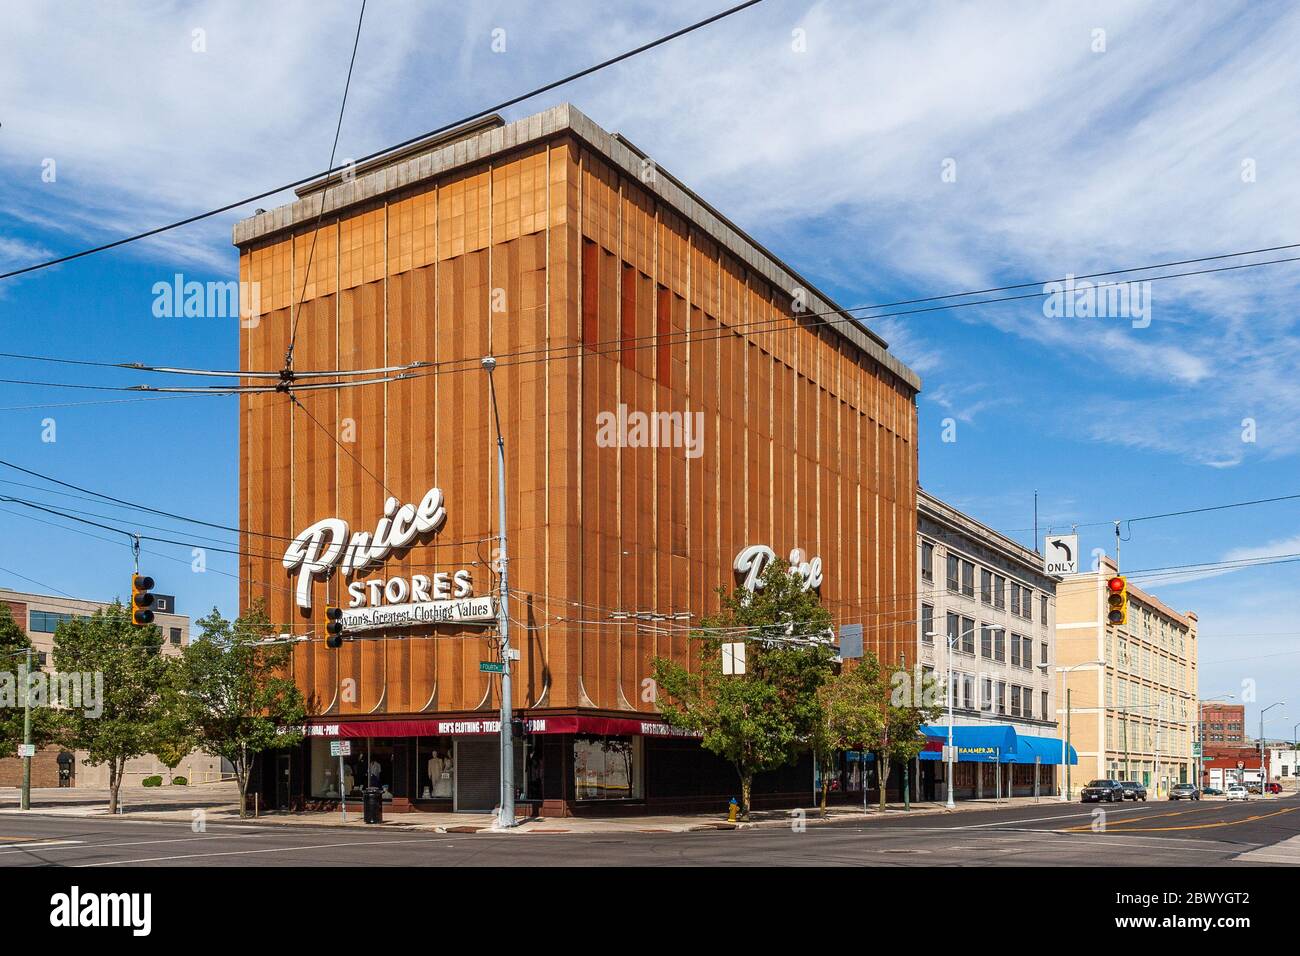 Price Stores building in downtown Dayton Stock Photo